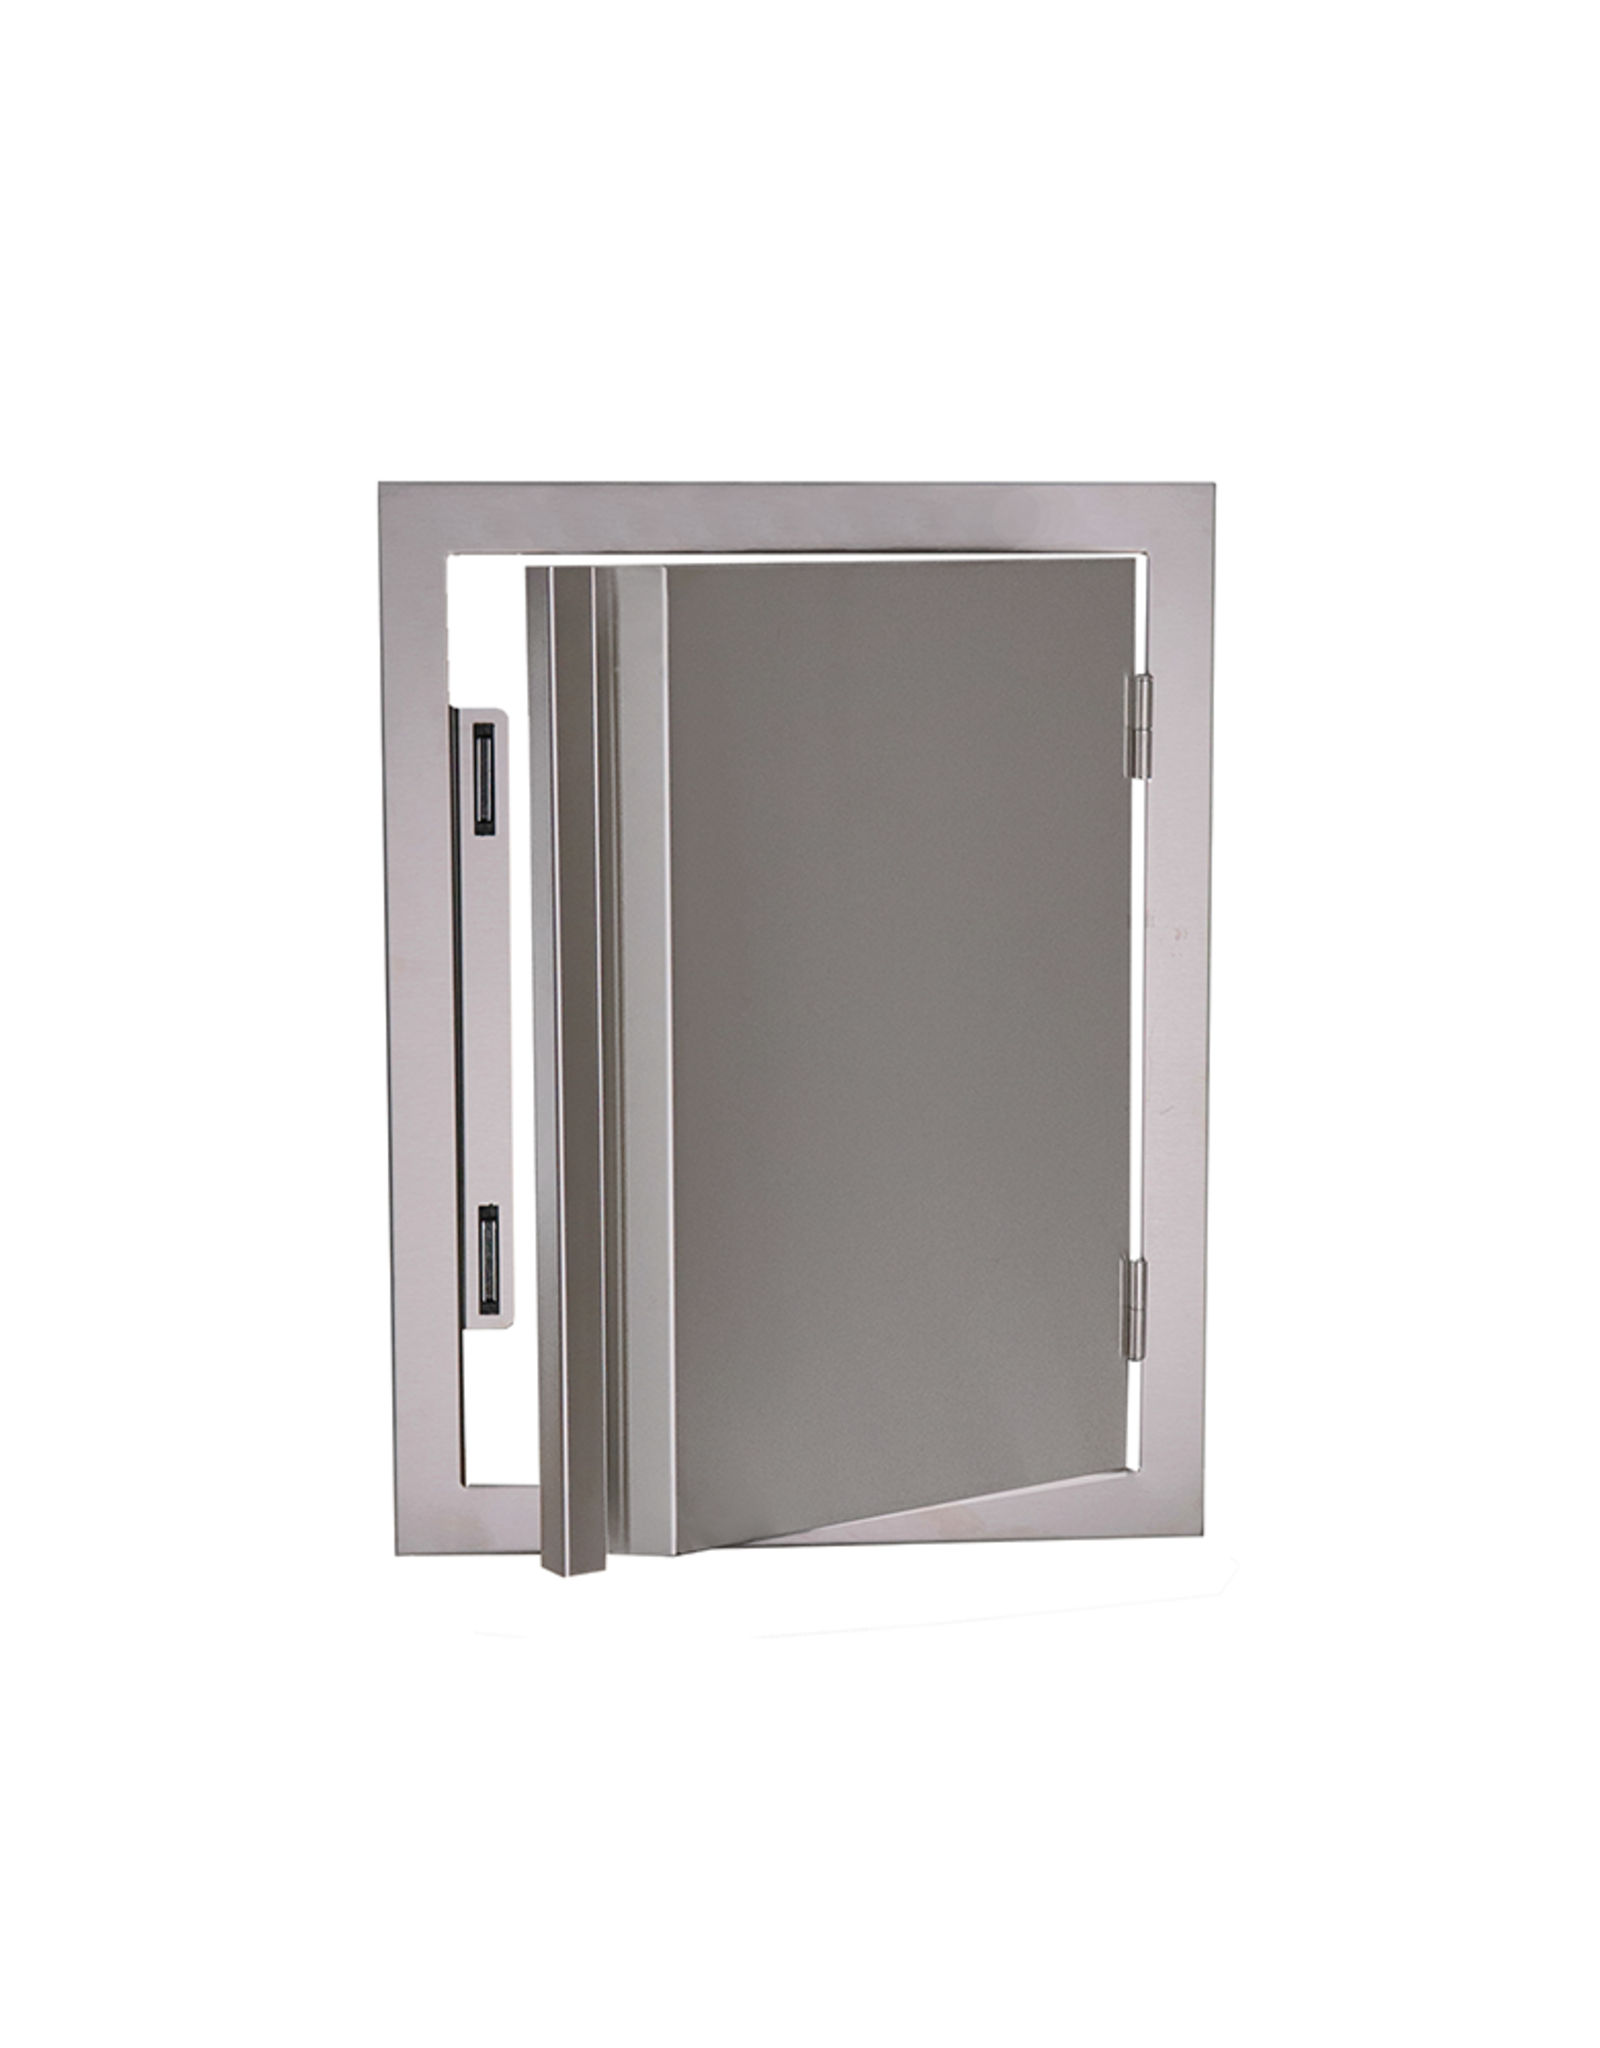 Renaissance Cooking Systems Renaissance Cooking Systems The Valiant Series Vertical Door - VDV1